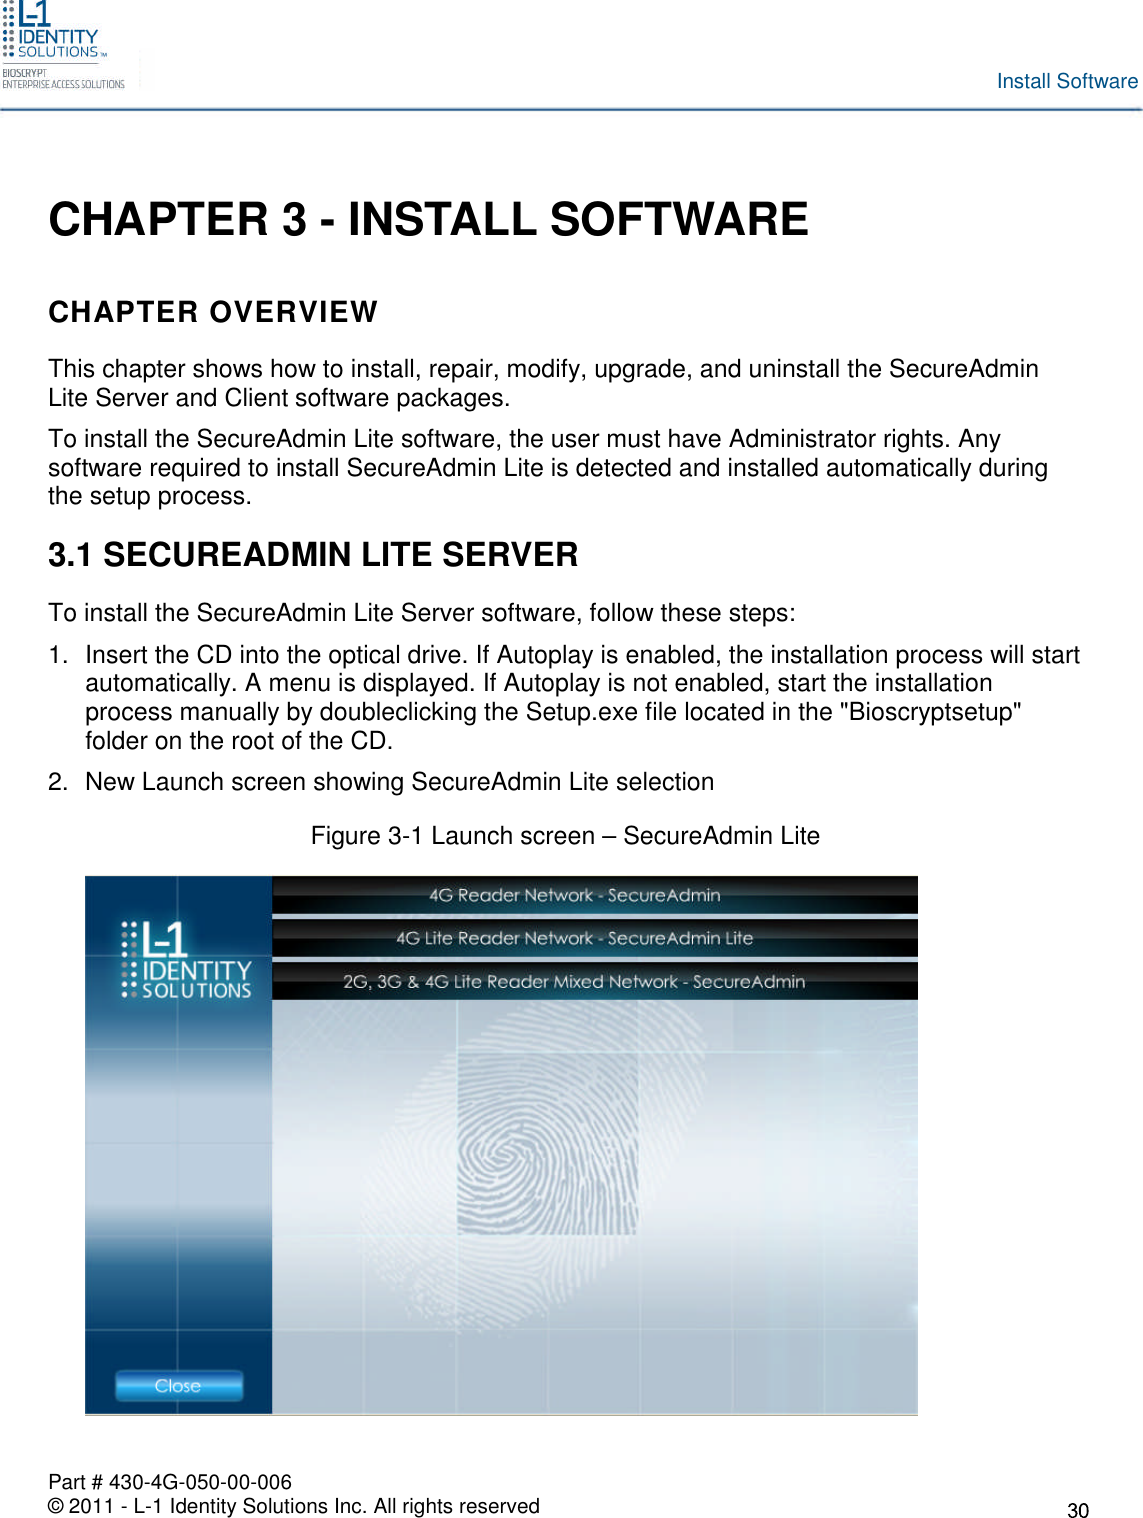 Part # 430-4G-050-00-006© 2011 - L-1 Identity Solutions Inc. All rights reservedInstall SoftwareCHAPTER 3 - INSTALL SOFTWARECHAPTER OVERVIEWThis chapter shows how to install, repair, modify, upgrade, and uninstall the SecureAdminLite Server and Client software packages.To install the SecureAdmin Lite software, the user must have Administrator rights. Anysoftware required to install SecureAdmin Lite is detected and installed automatically duringthe setup process.3.1 SECUREADMIN LITE SERVERTo install the SecureAdmin Lite Server software, follow these steps:1. Insert the CD into the optical drive. If Autoplay is enabled, the installation process will startautomatically. A menu is displayed. If Autoplay is not enabled, start the installationprocess manually by doubleclicking the Setup.exe file located in the &quot;Bioscryptsetup&quot;folder on the root of the CD.2. New Launch screen showing SecureAdmin Lite selectionFigure 3-1 Launch screen – SecureAdmin Lite